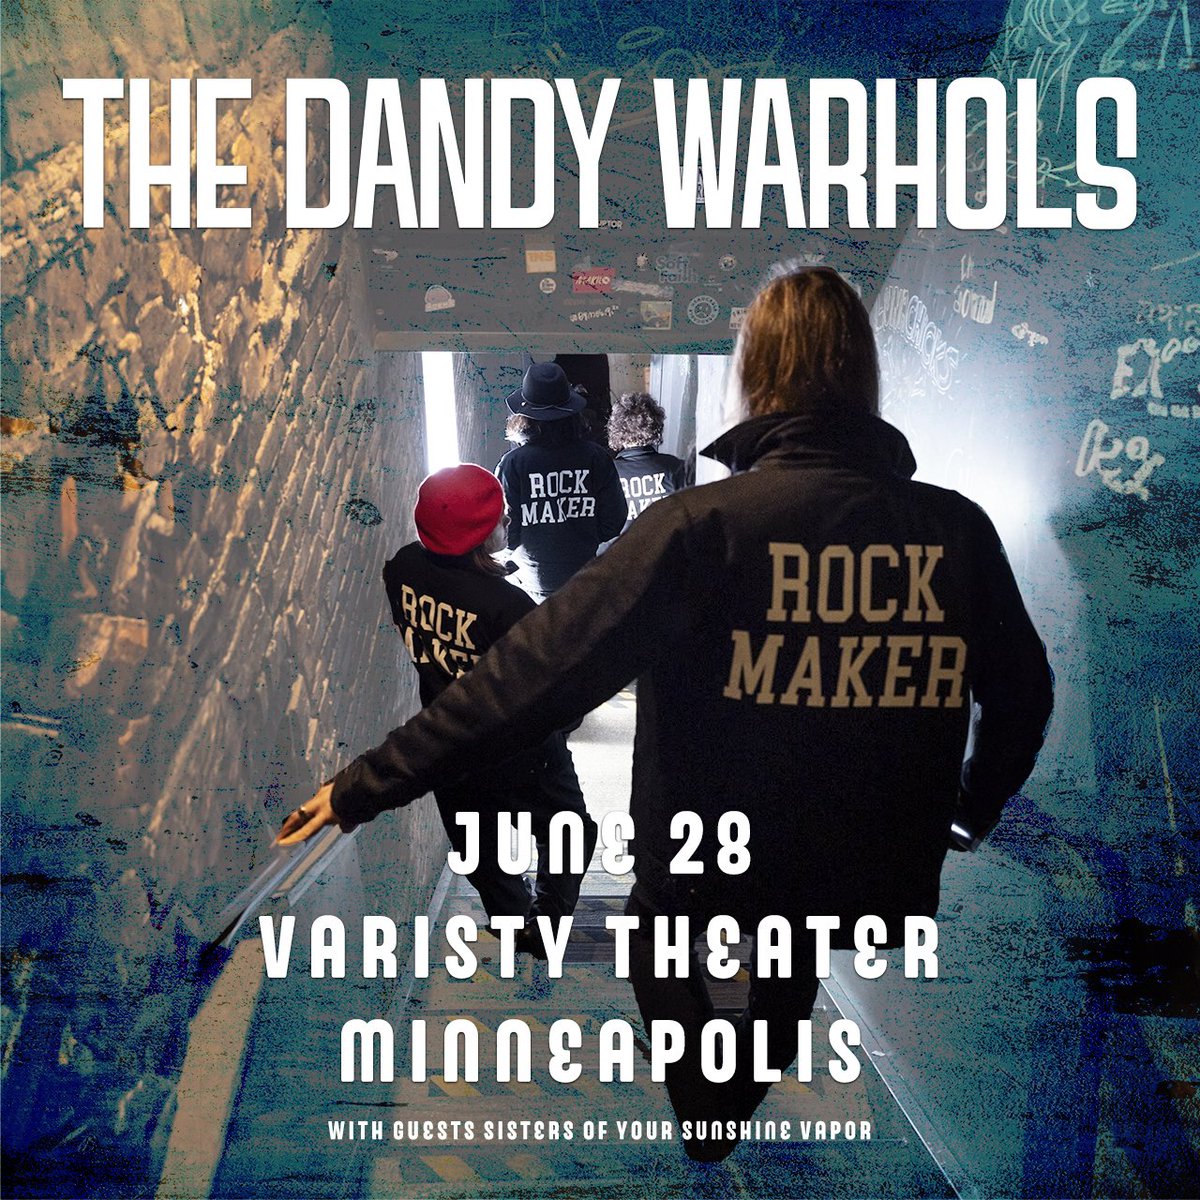 🇺🇸 The Dandy Warhols LIVE Friday June 28th at @VarsityTheater Minneapolis with guests @SOYSV. 🎟 livemu.sc/4aU1WSy